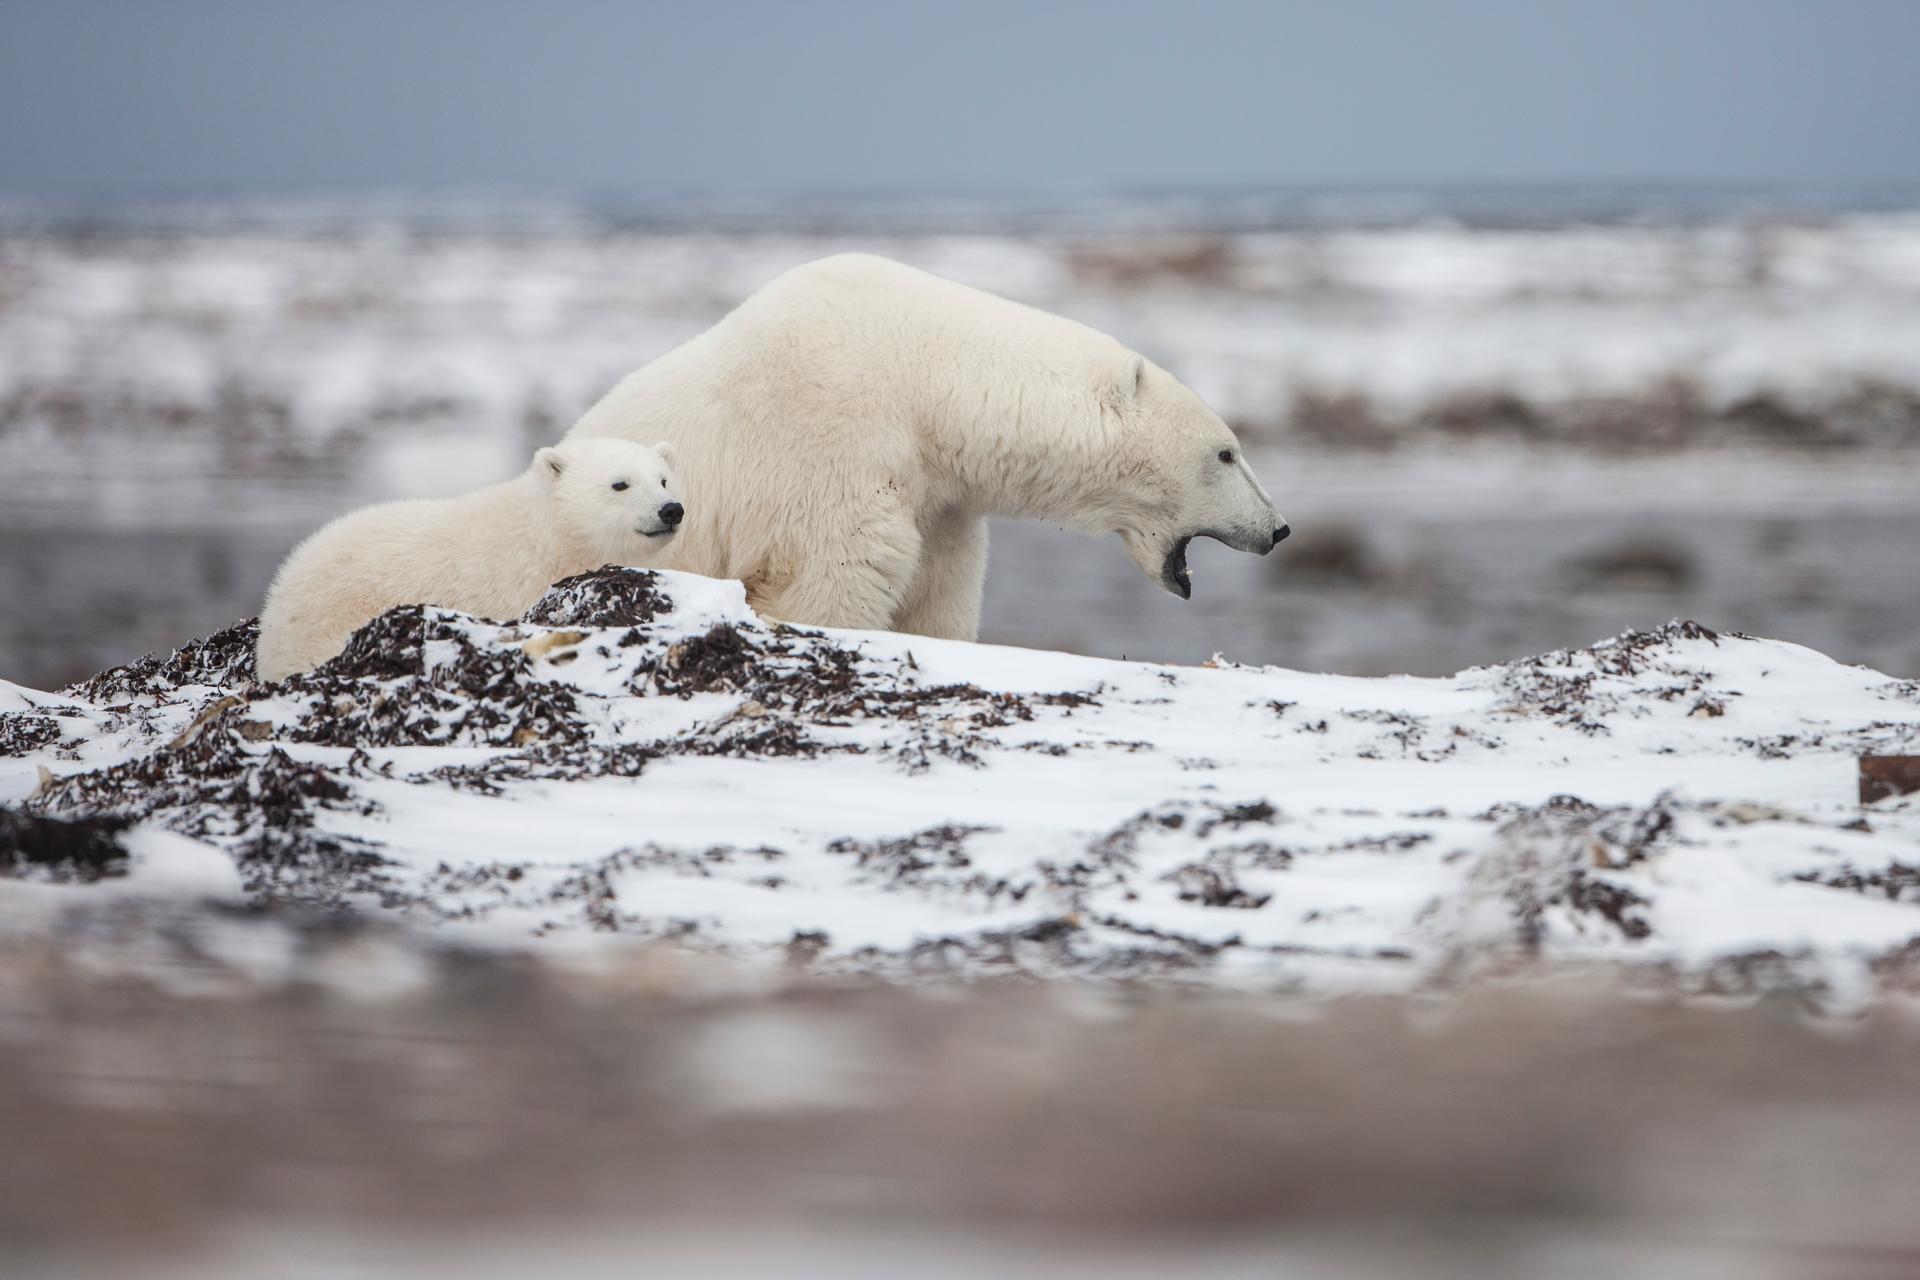 Fly-in photo safaris allow you to get close to polar bears